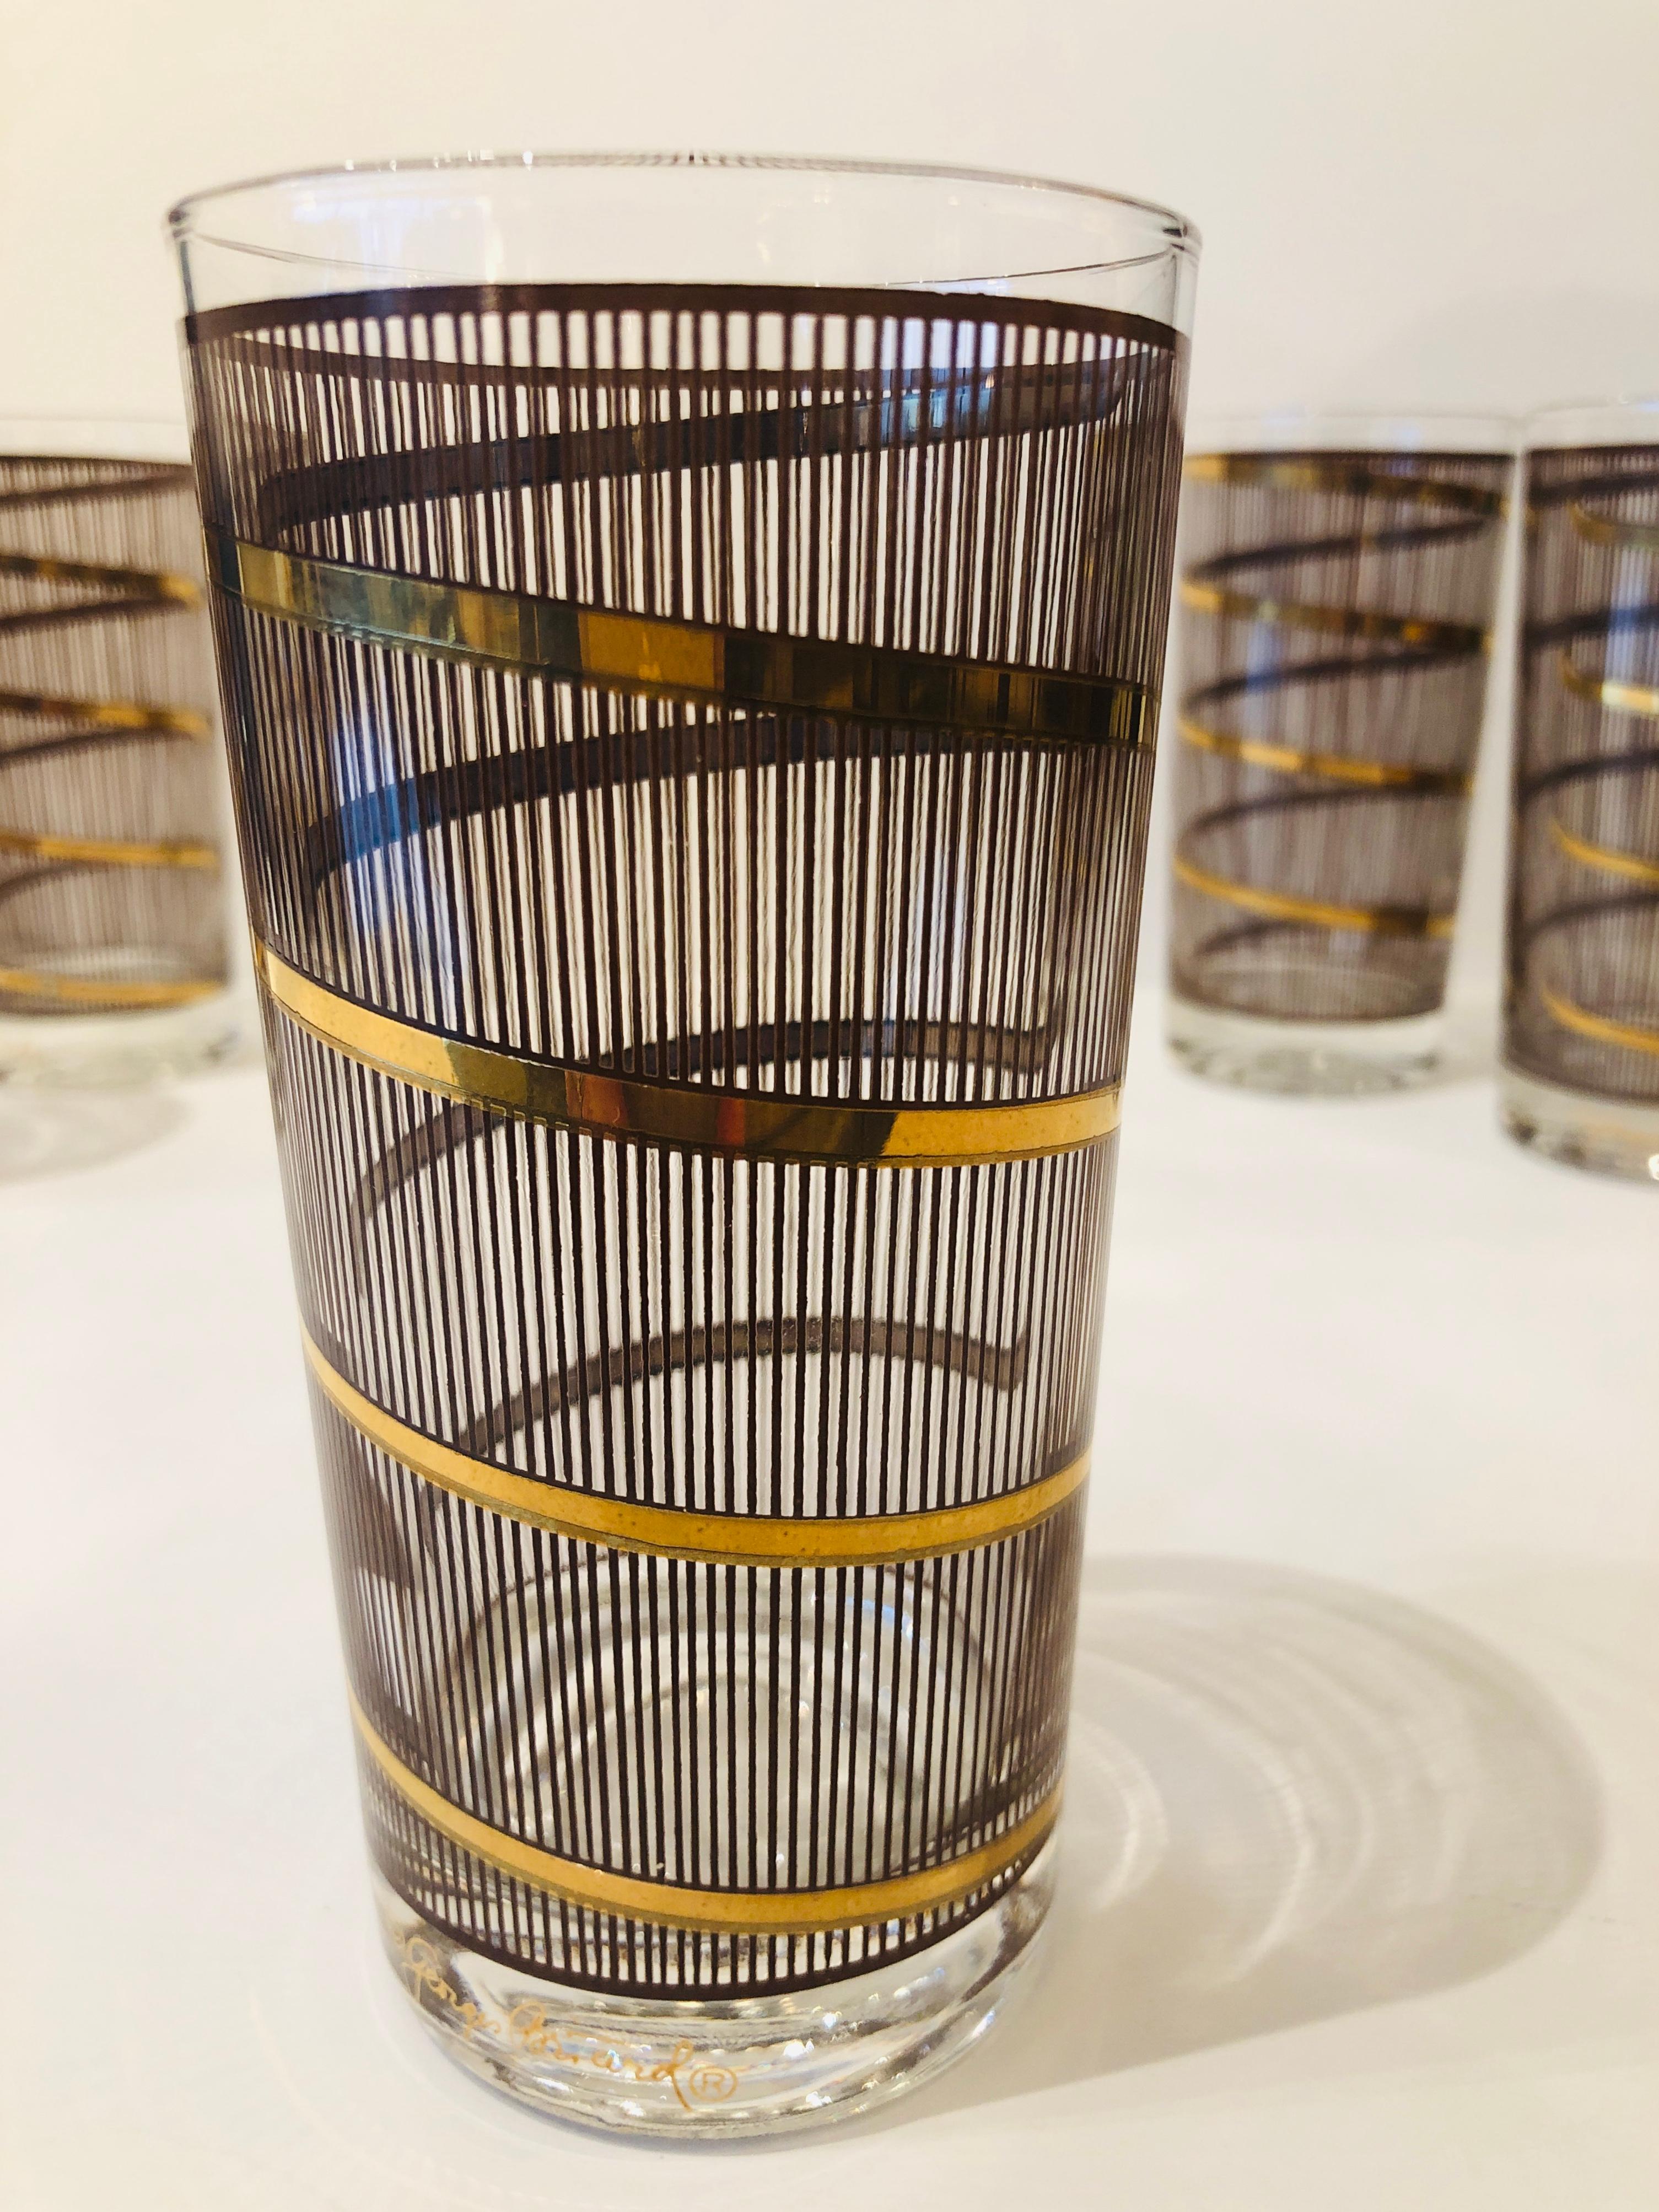 Offered is a set of six Mid-Century Modern signed Georges Briard pressed smoked and gold gilt glass cocktail glasses / barware with a modern circular gold gilt design over a chocolate brown vertical line. Truly groovy barware. Would look fabulous on